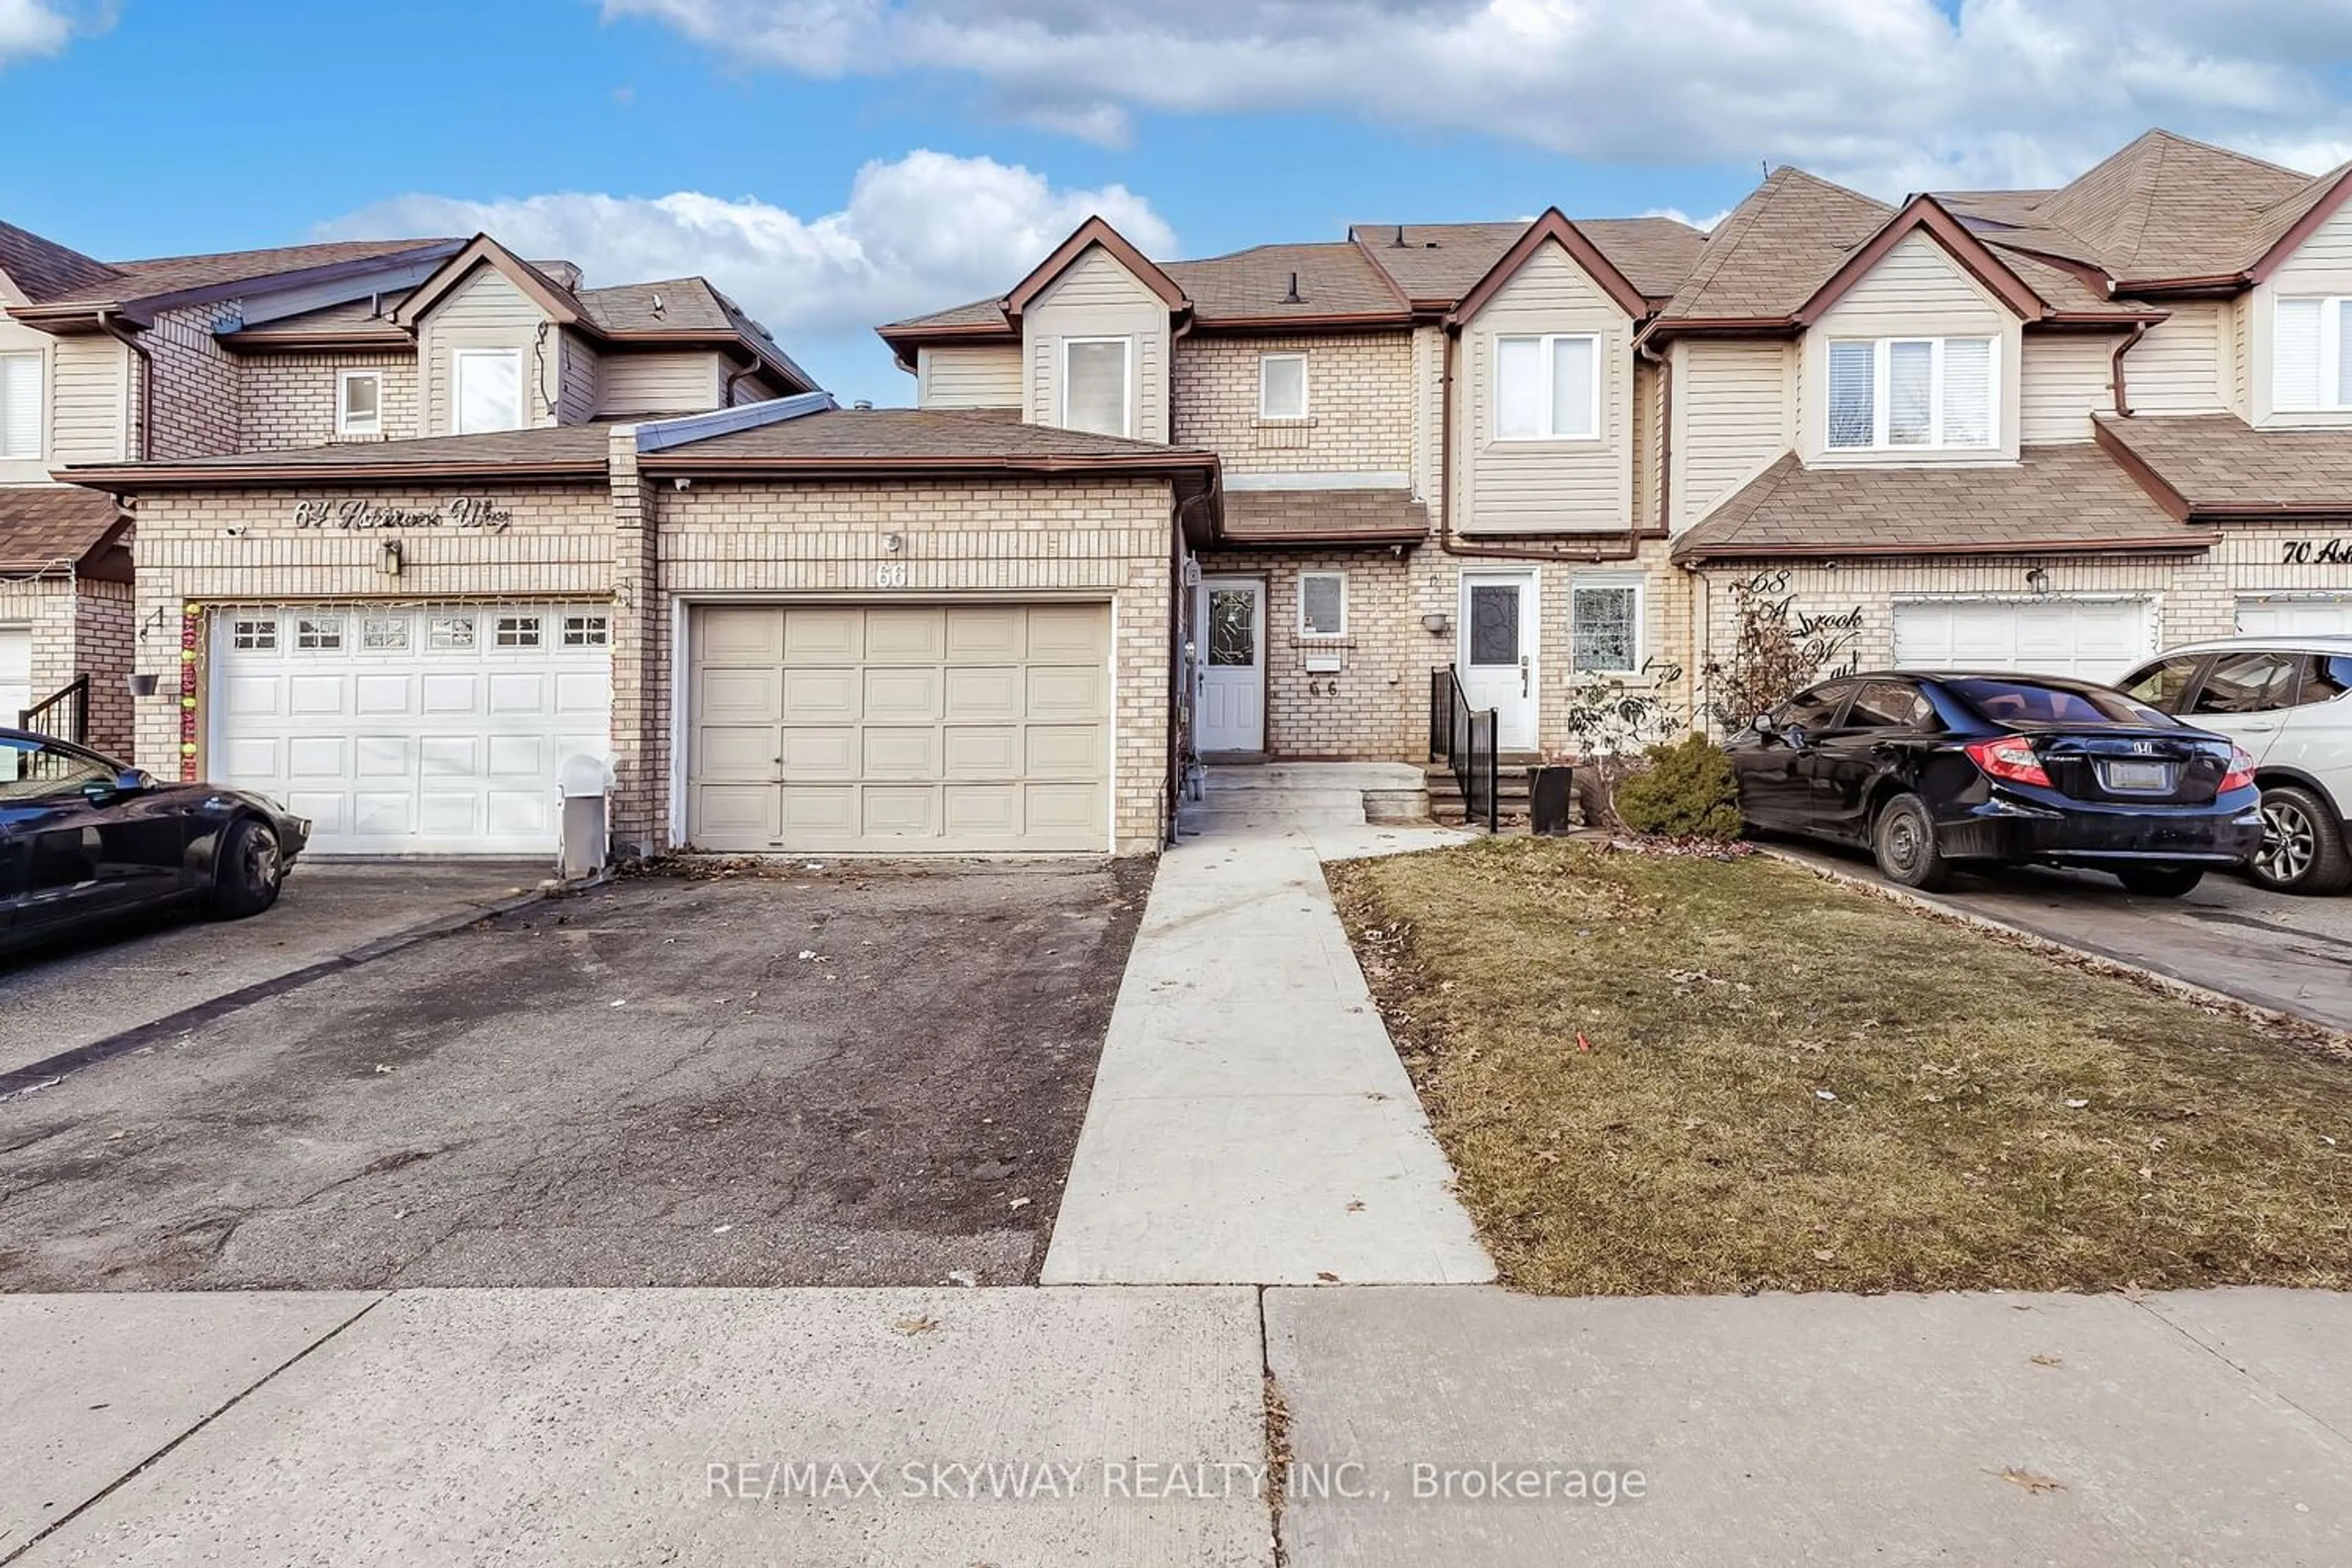 A pic from exterior of the house or condo for 66 Ashbrook Way, Brampton Ontario L6Y 4R3